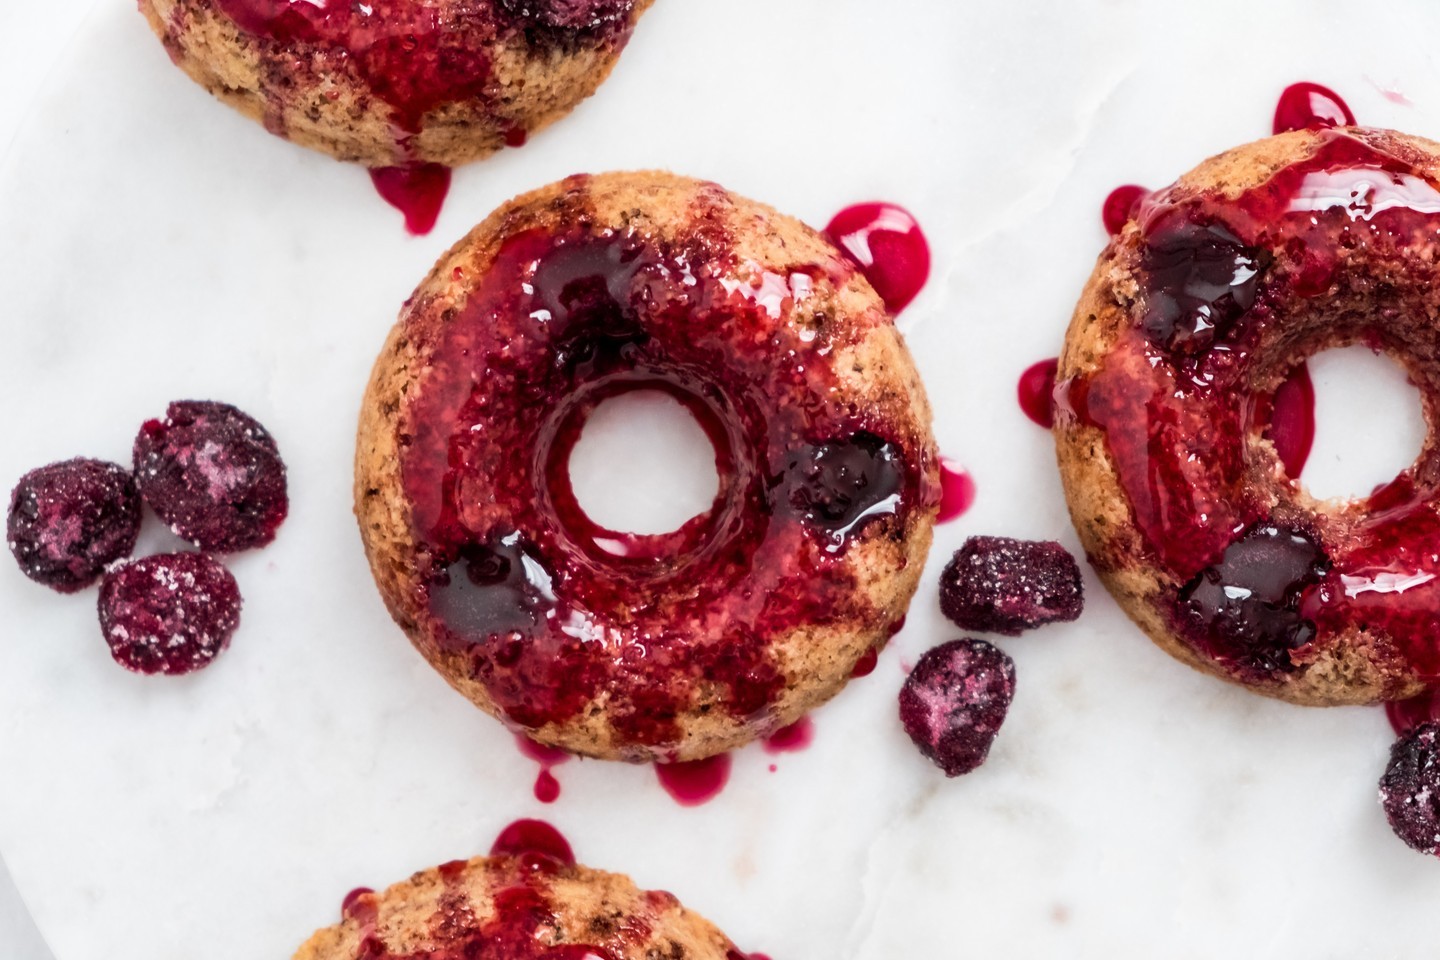 We donut know what we would do without cherries! Who's baking up some cherry donuts today? #NationalDonutDay